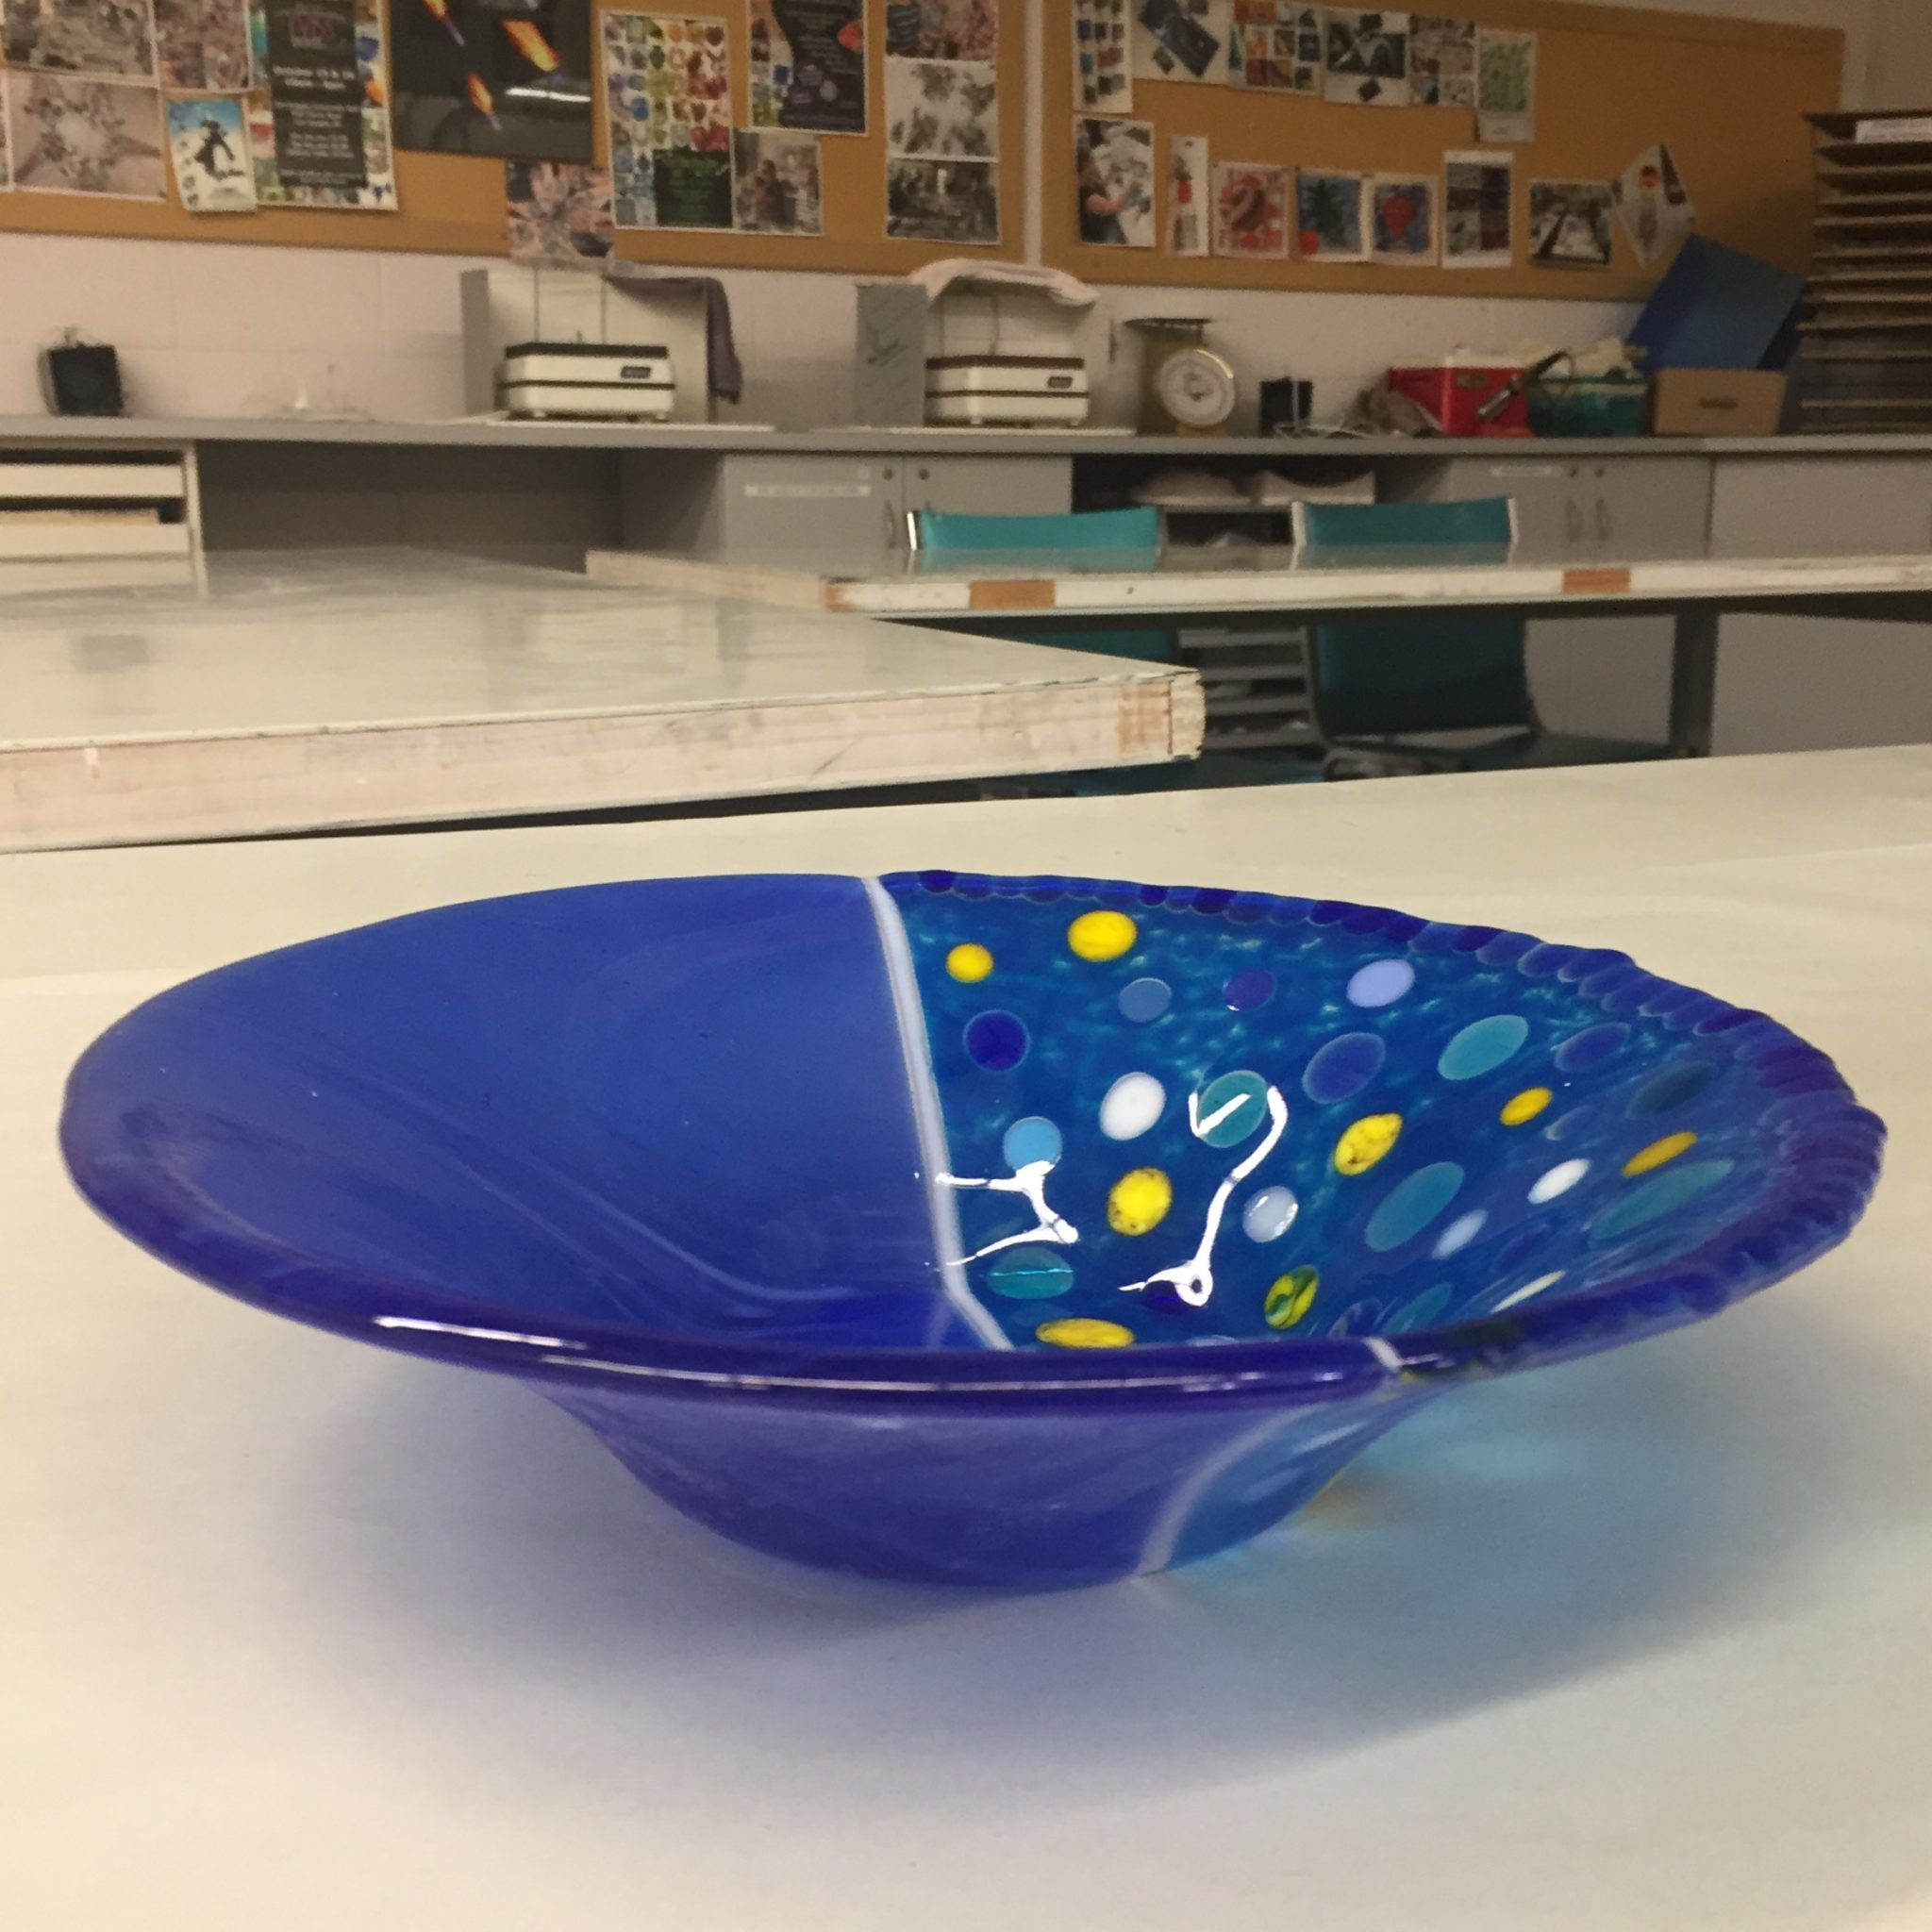 Vernon Community Arts Centre - Fused Glass Bowl: May 18